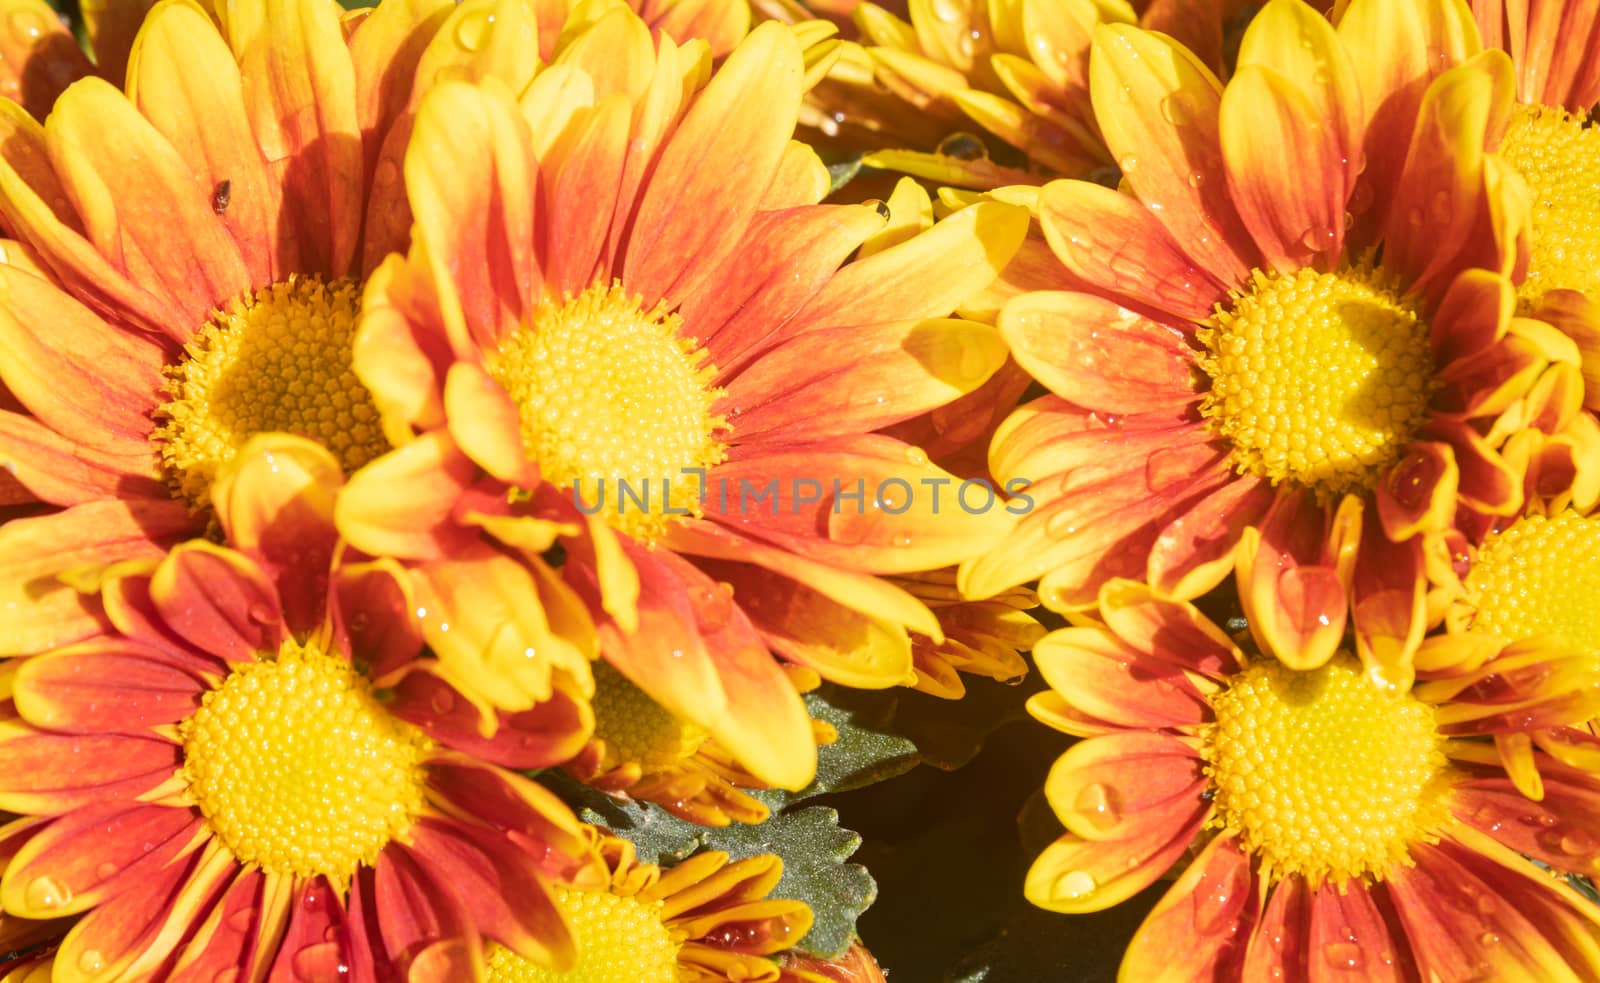 Orange Gerbera Daisy or Gerbera Flower with Water Drop and Natural Light in Garden Background